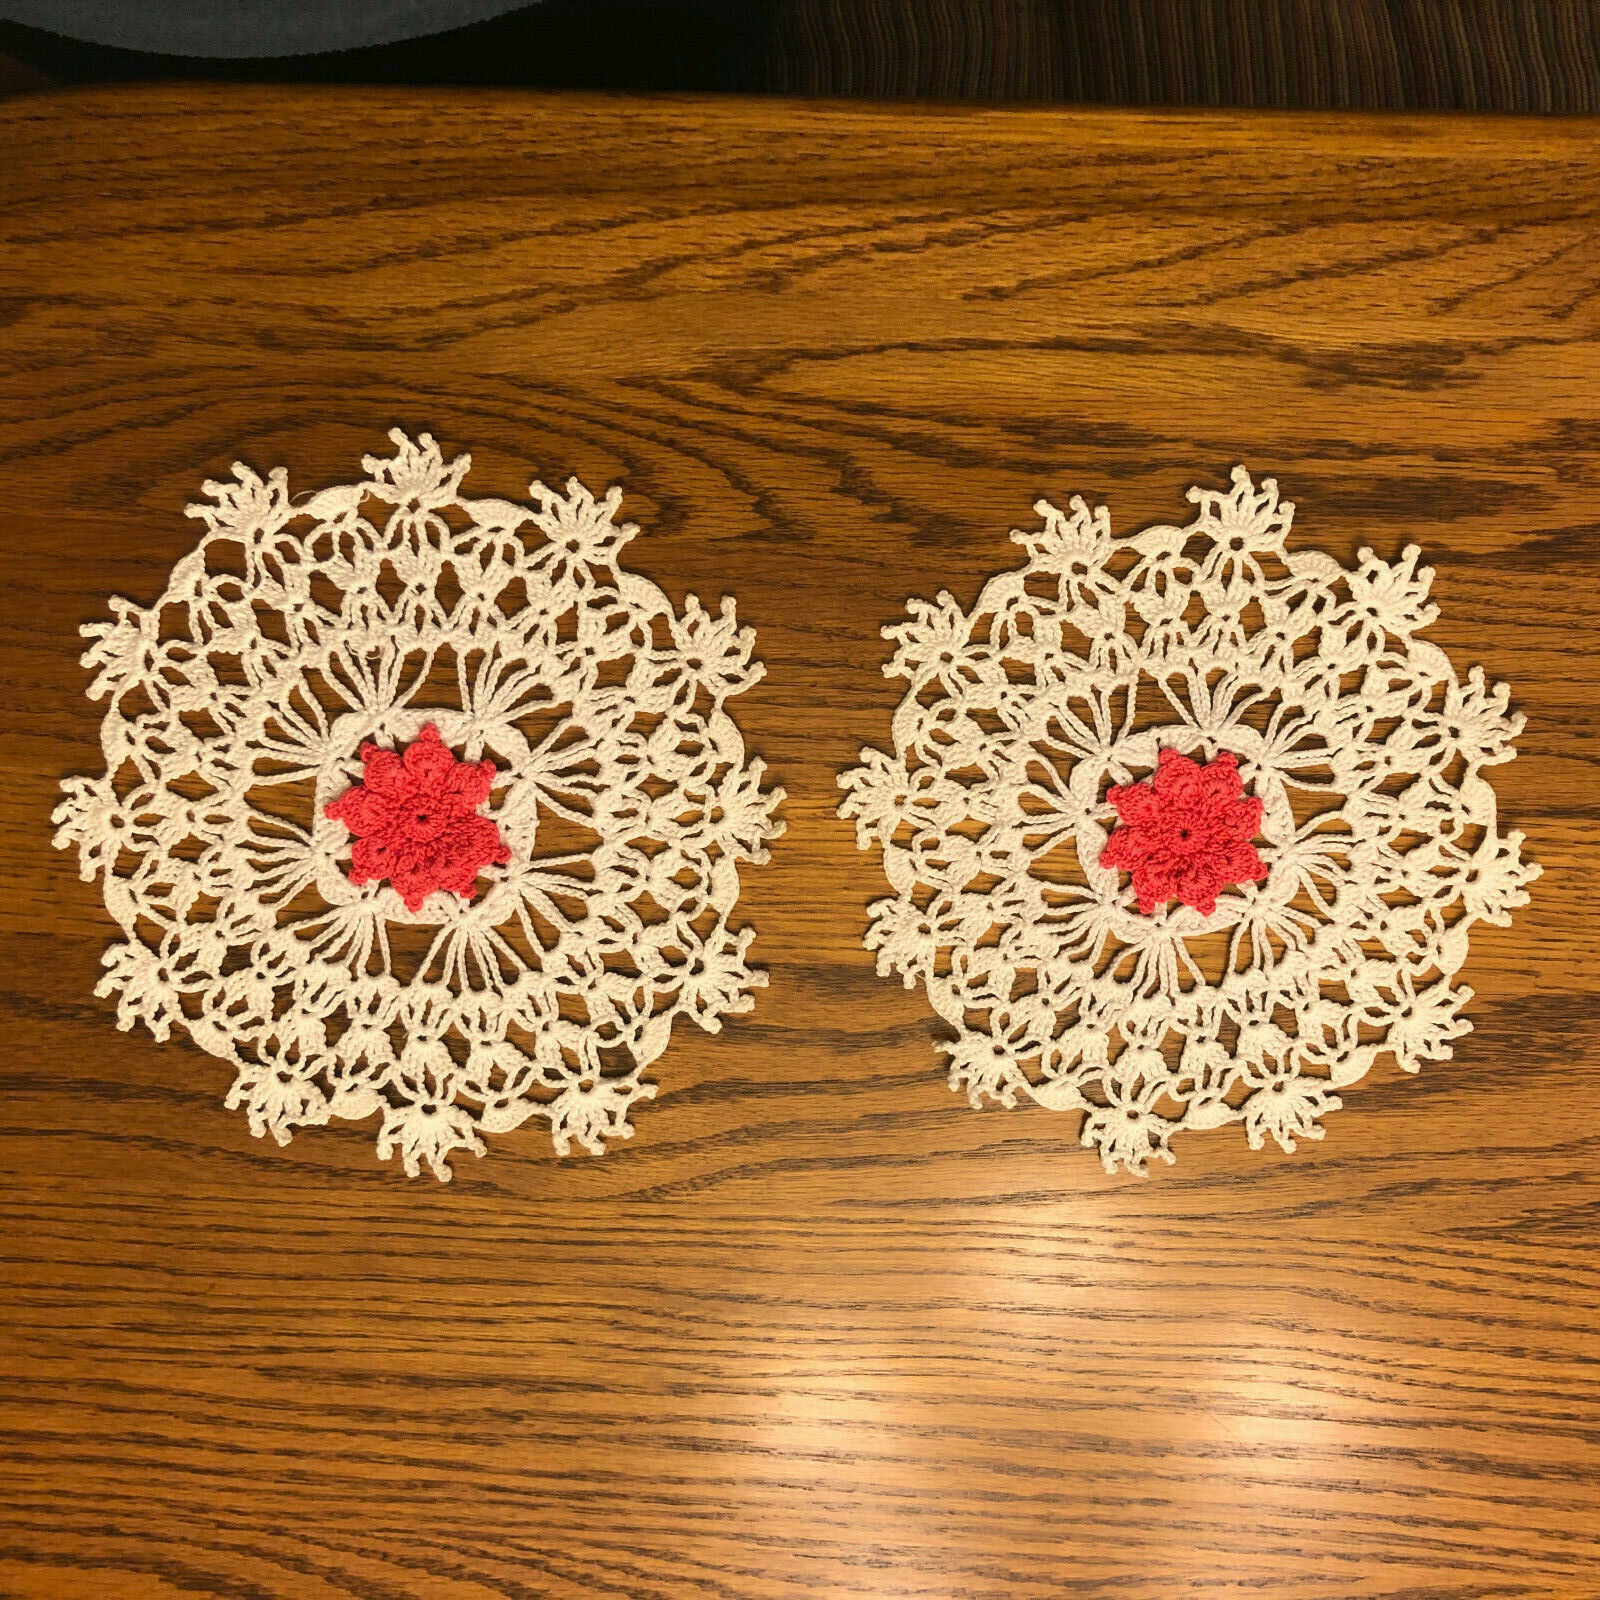 2 Vintage Crocheted Doilies-White with Pink Center- Gorgous